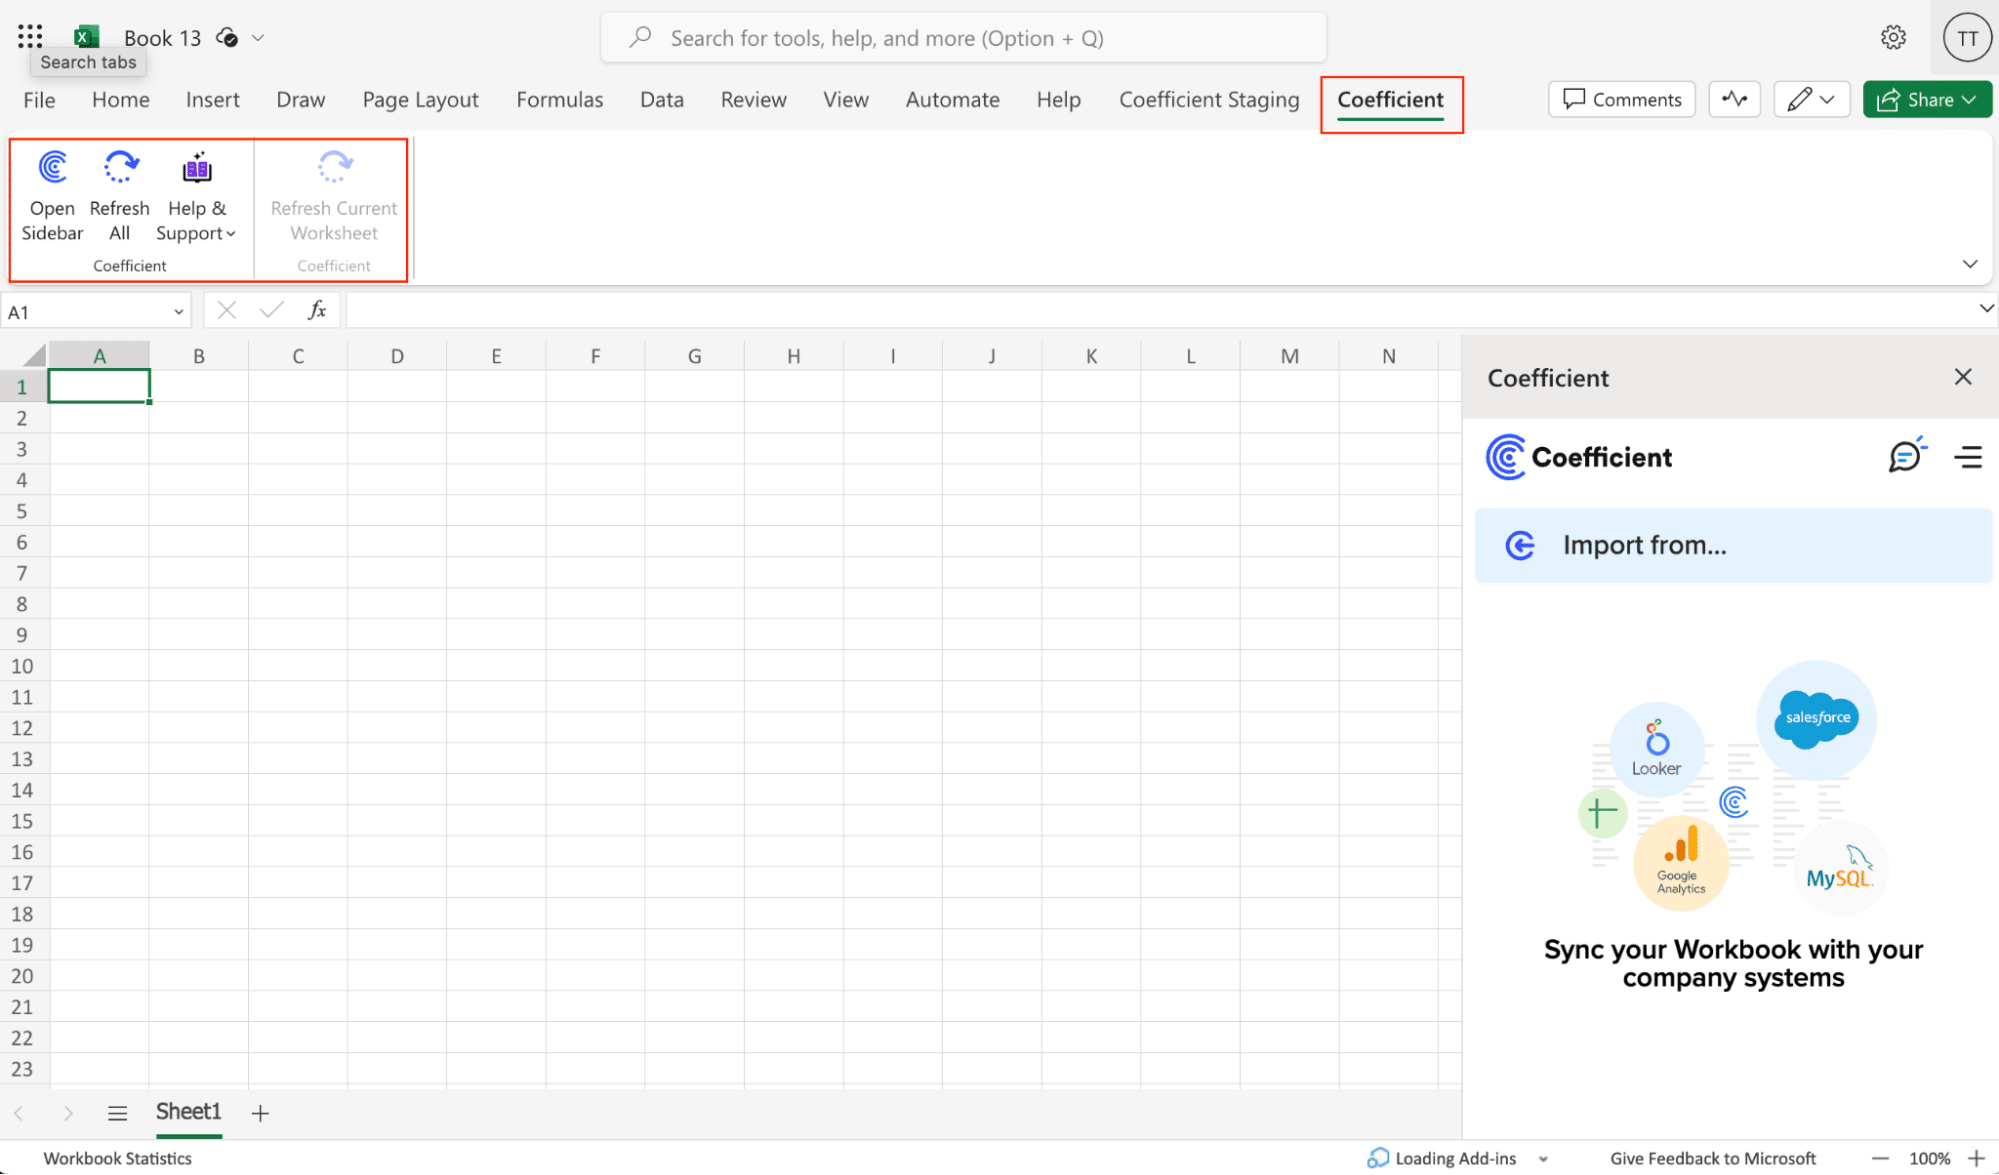 Initiating the Coefficient sidebar in Excel for advanced data import options